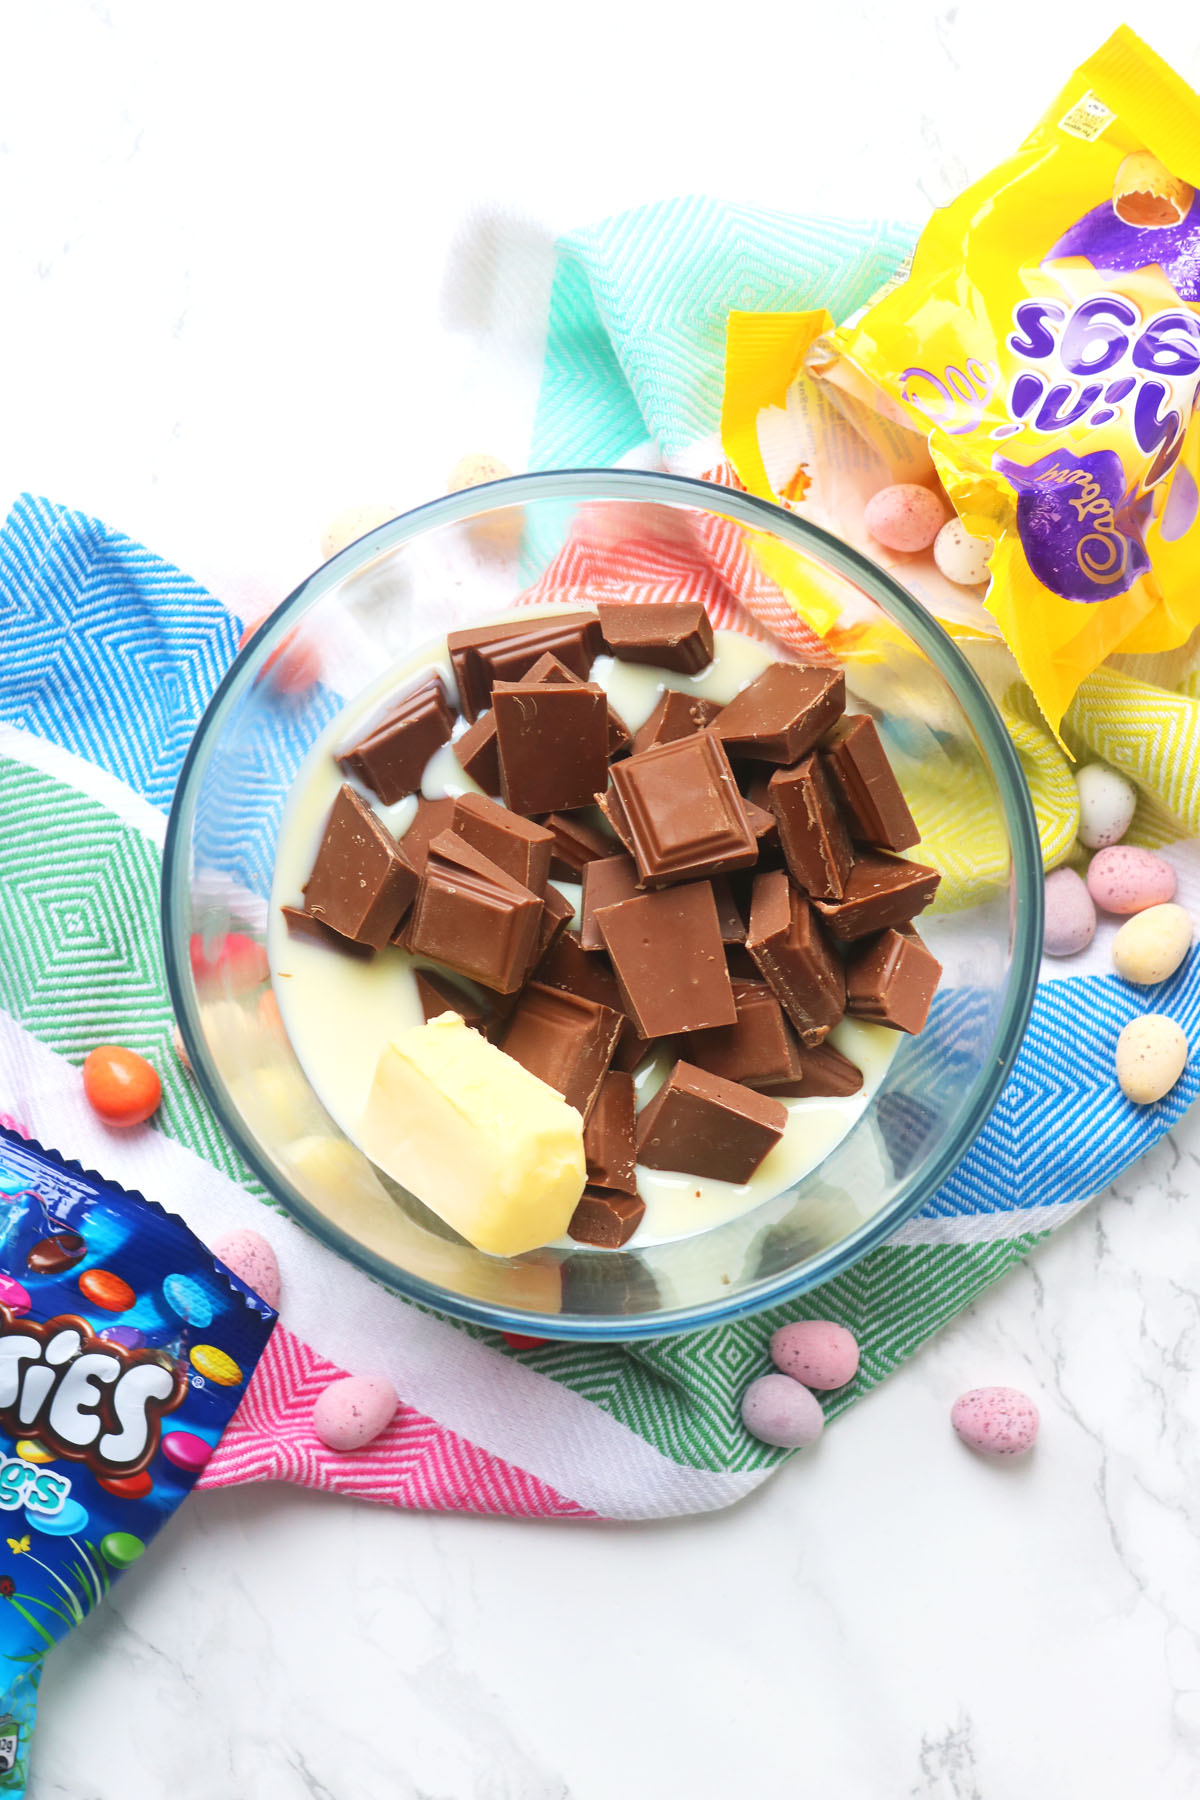 This Easter Fudge is incredibly easy to make in the microwave with just butter, condensed milk and chocolate